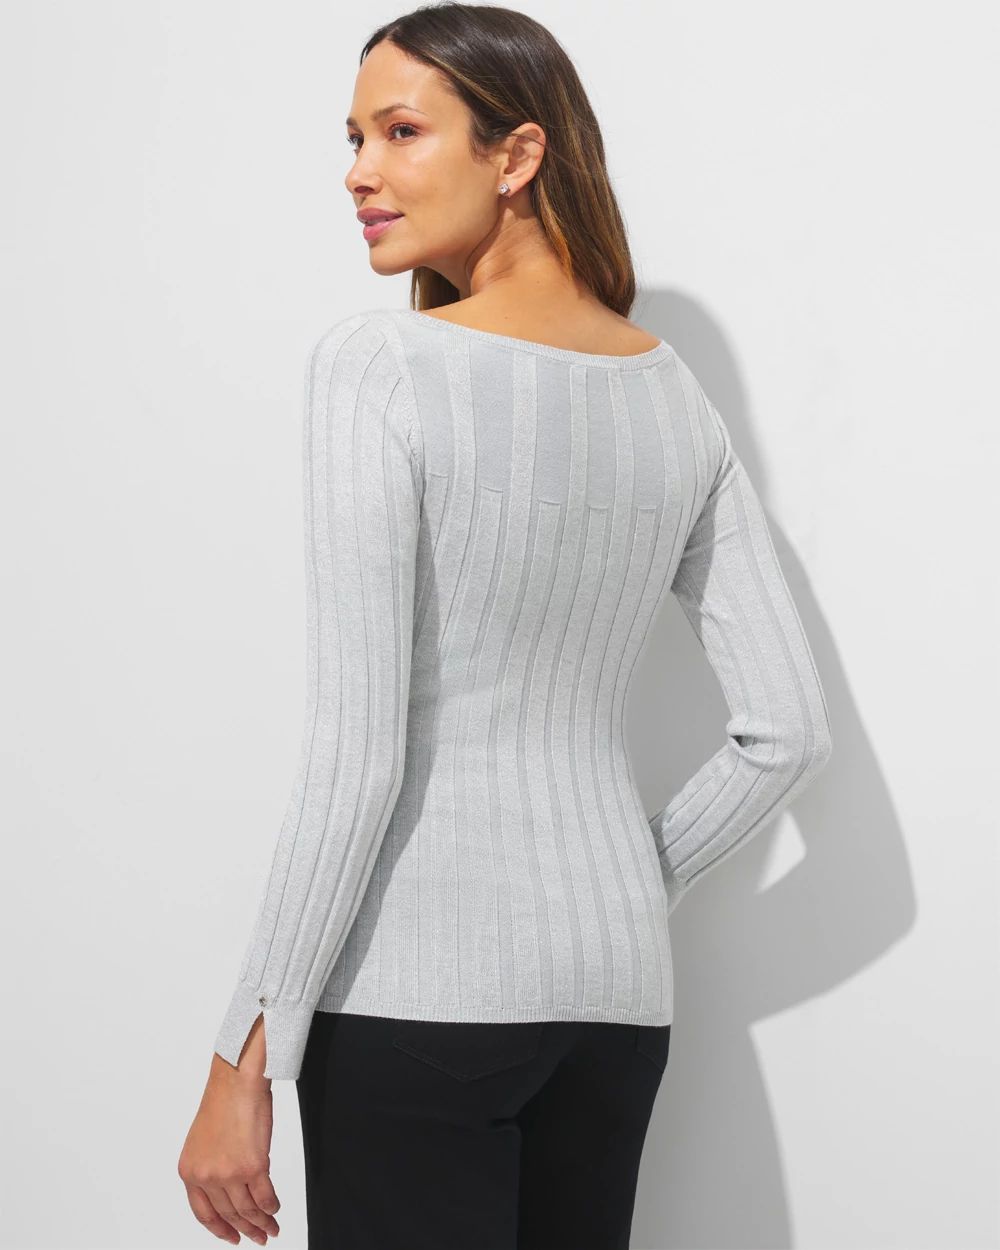 Outlet WHBM Boat-Neck Pullover Sweater